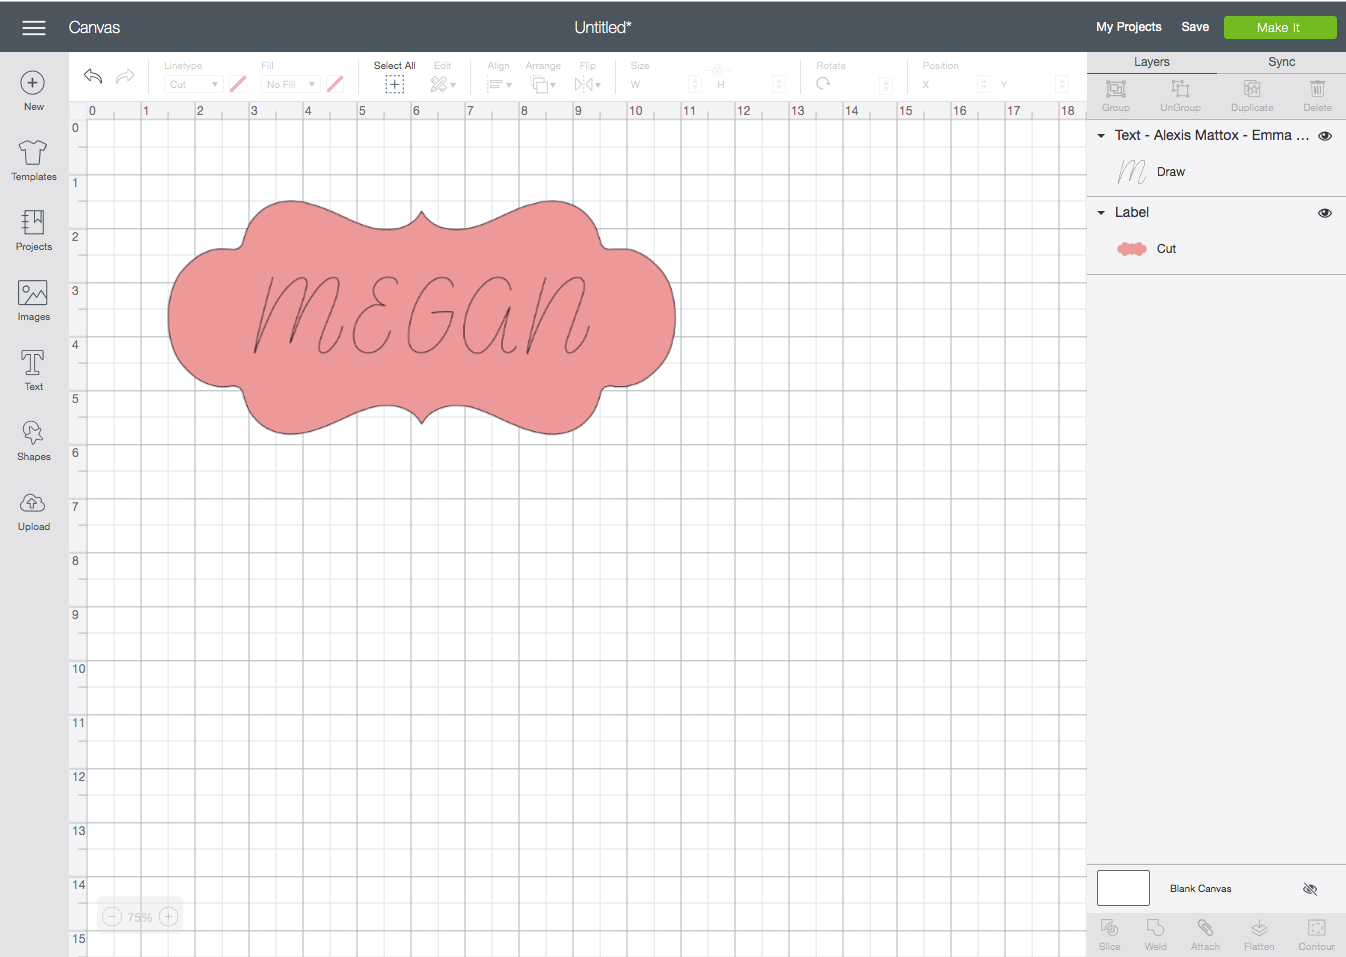 screenshot of the cricut design studio interface. The name "megan" it typed on top of a red badge shape.